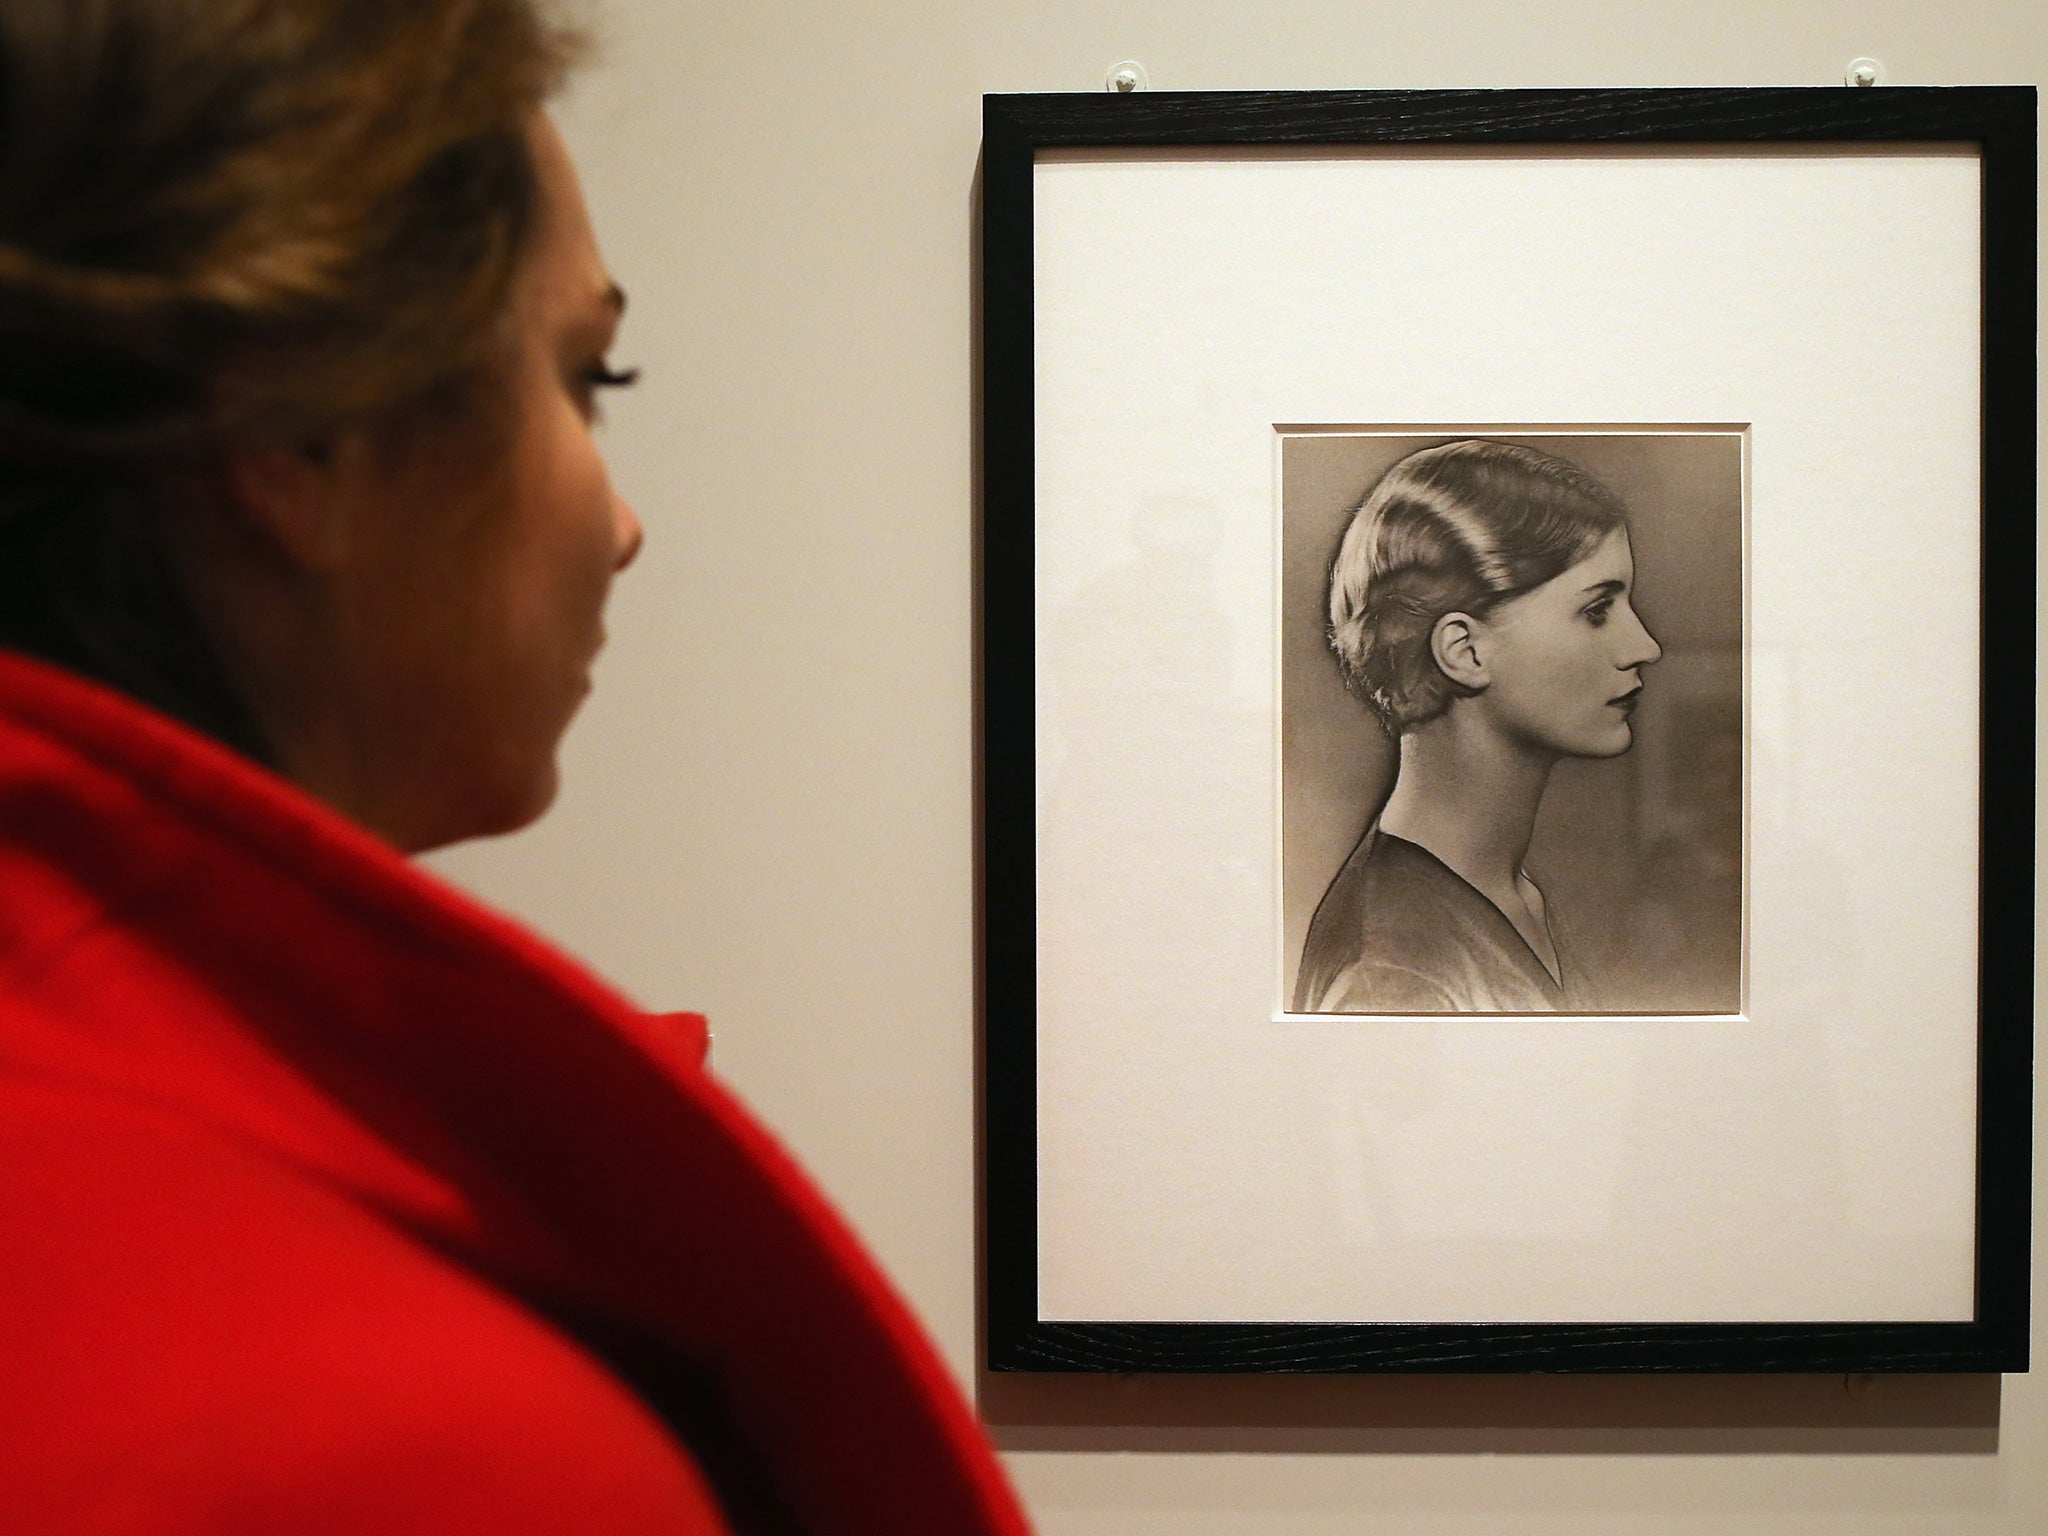 A visitor looks at a photograph of Lee Miller, by Man Ray at the National Portrait Gallery on February 6, 2013 in London, England